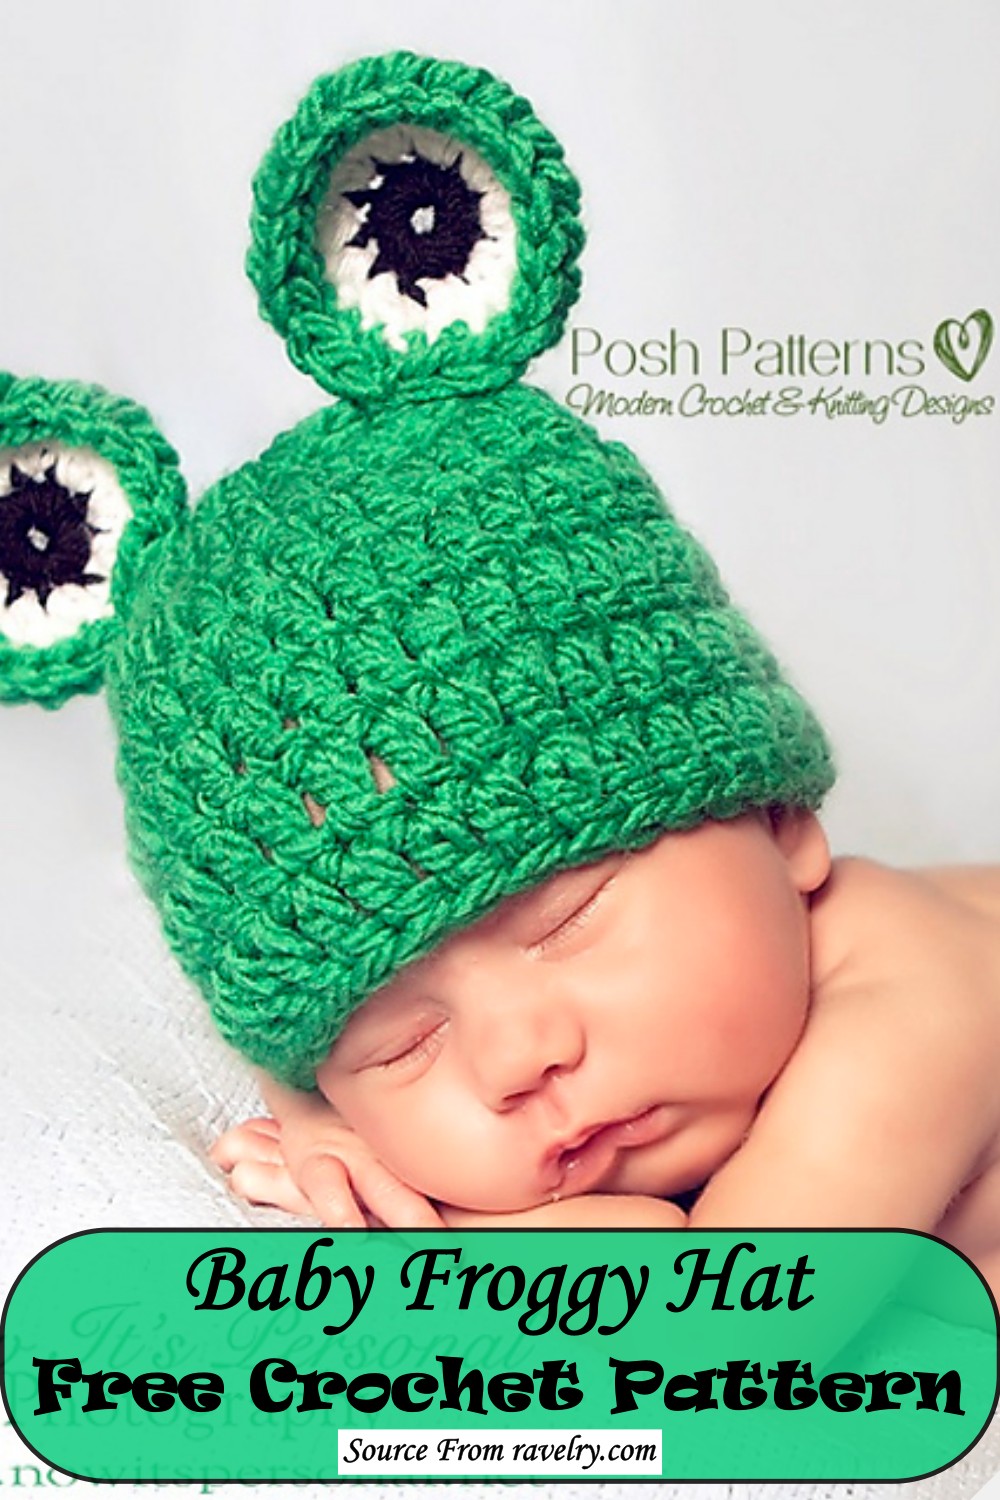 Baby Froggy Hat